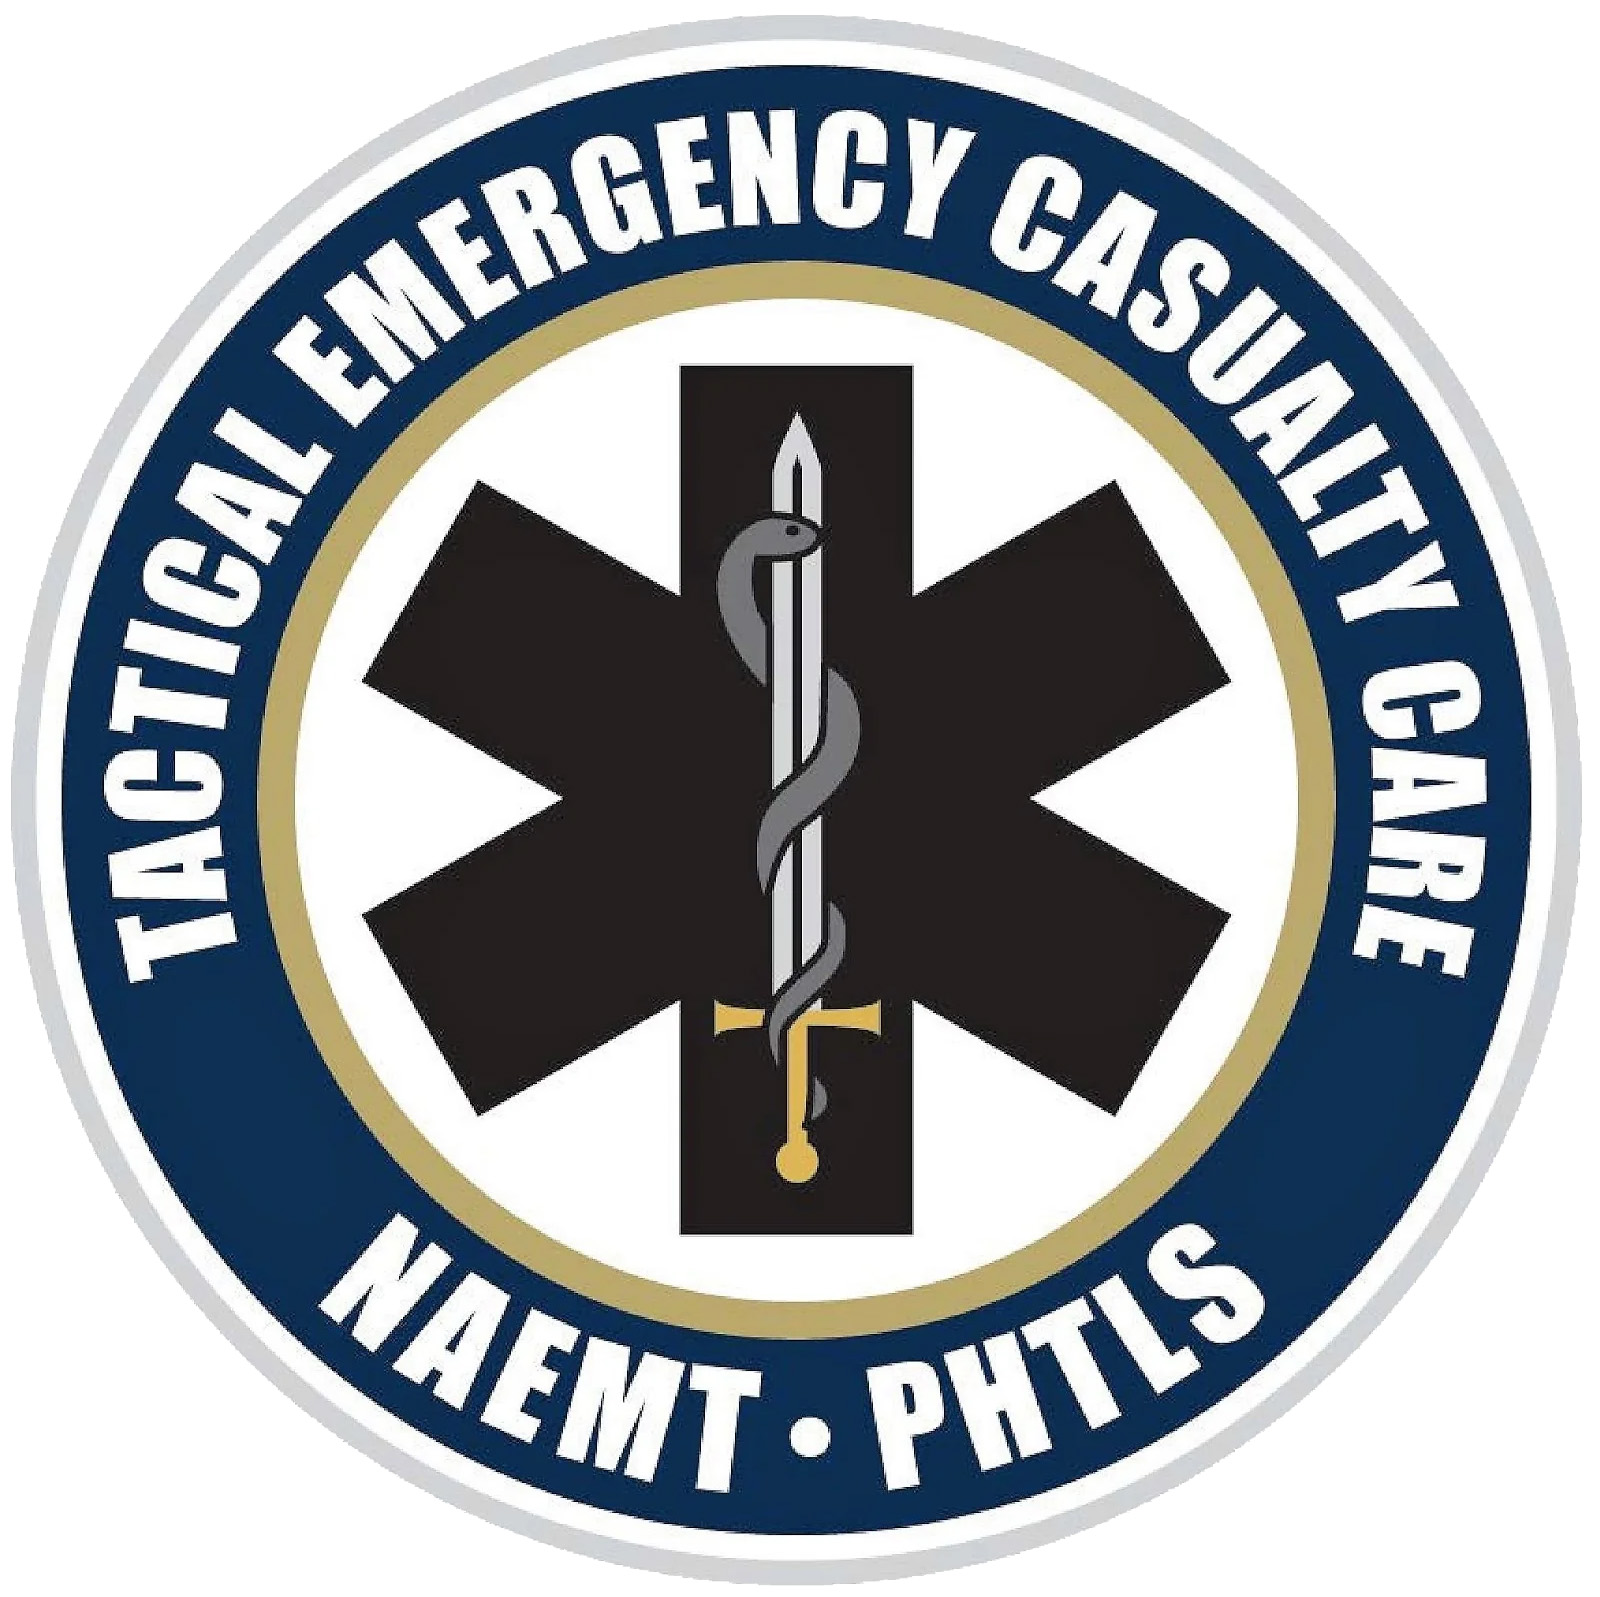 Who Should Take Tactical Emergency Casualty Care (TECC) Training?